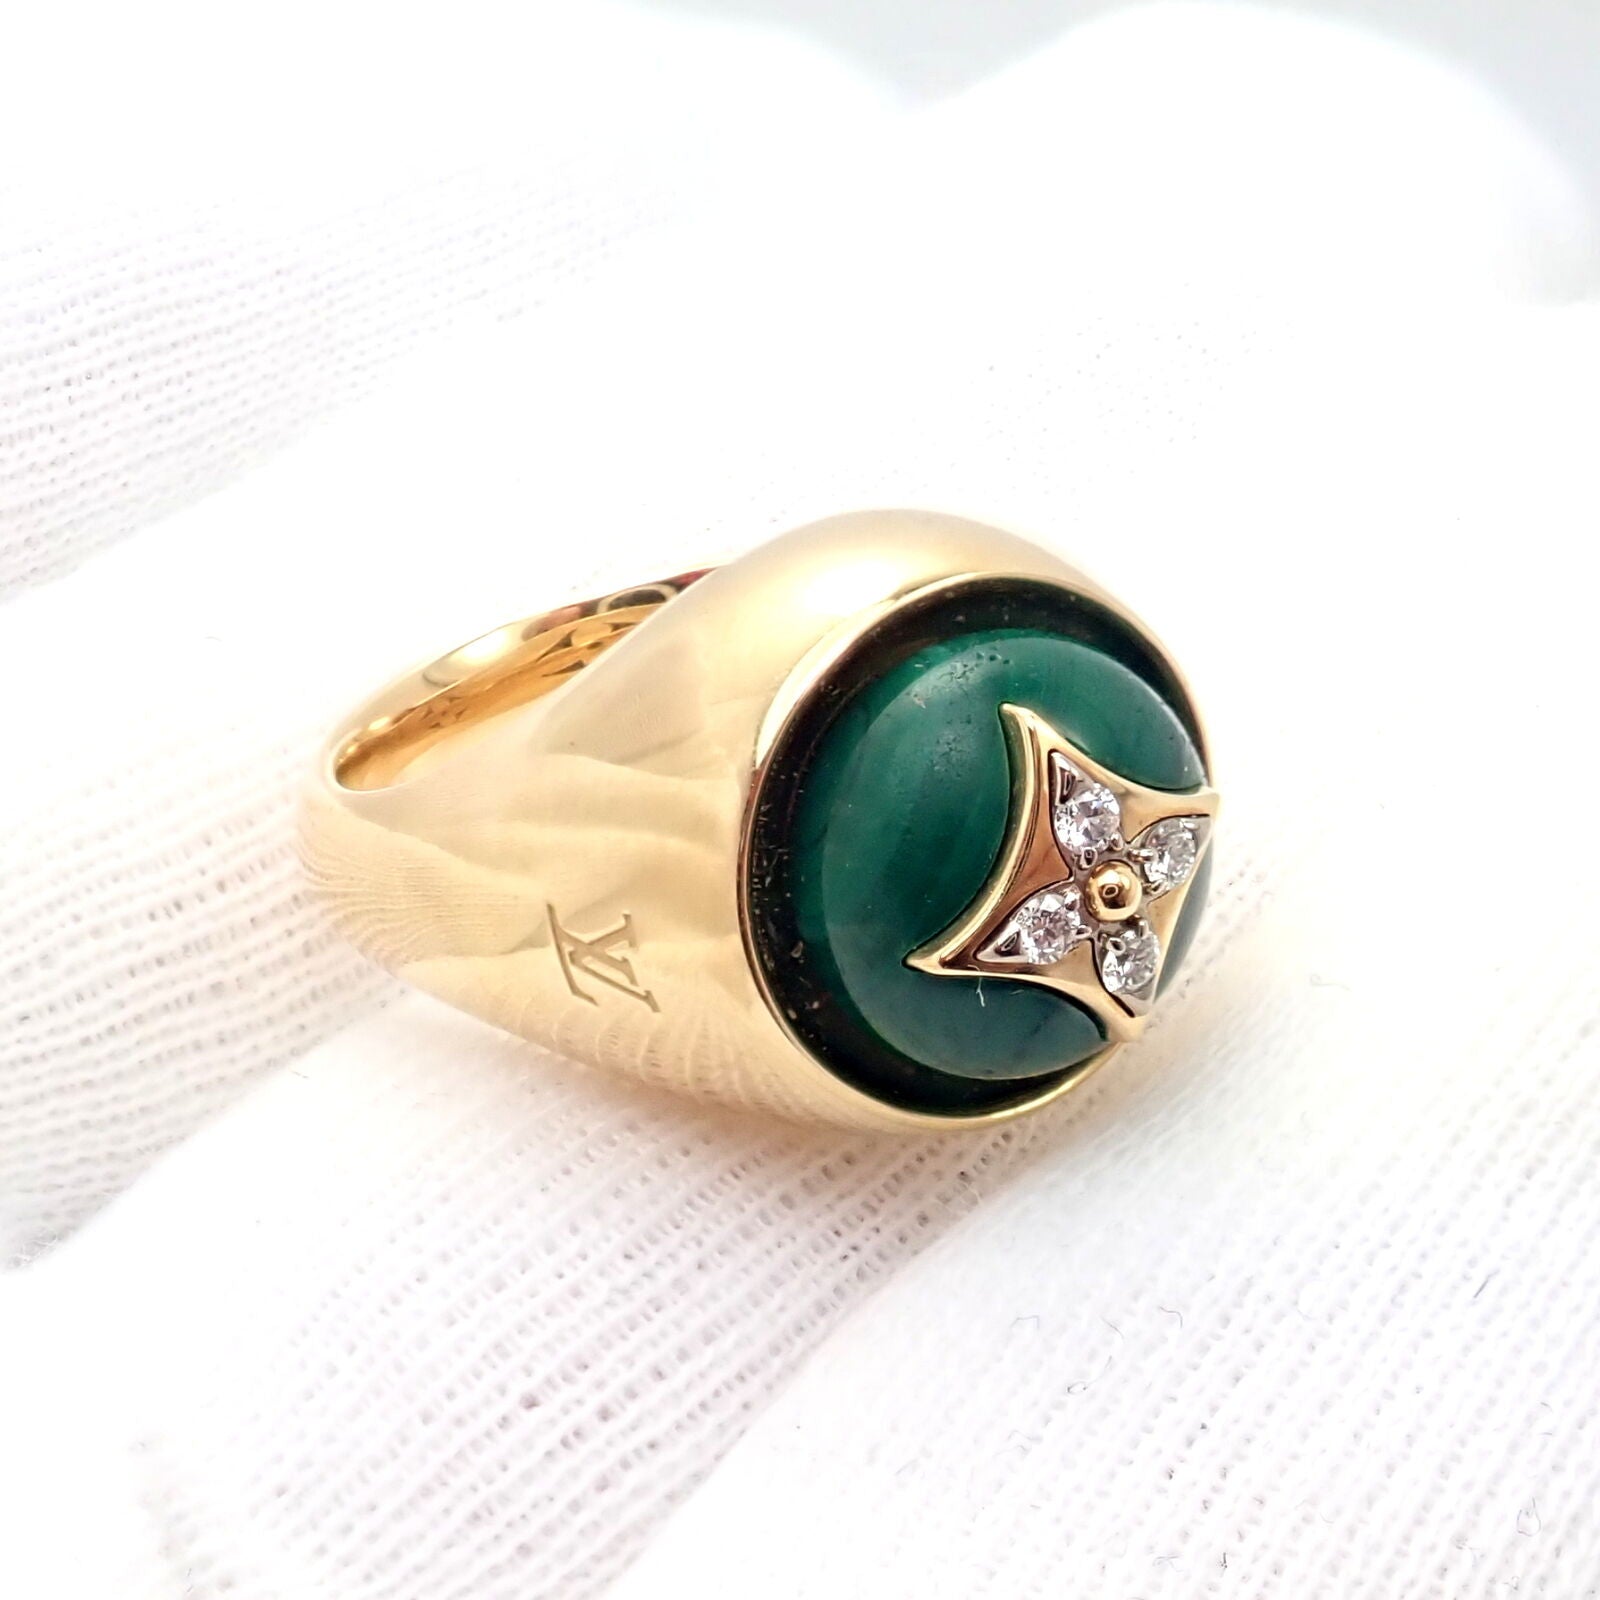 Louis Vuitton B.Blossom yellow gold ring in malachite